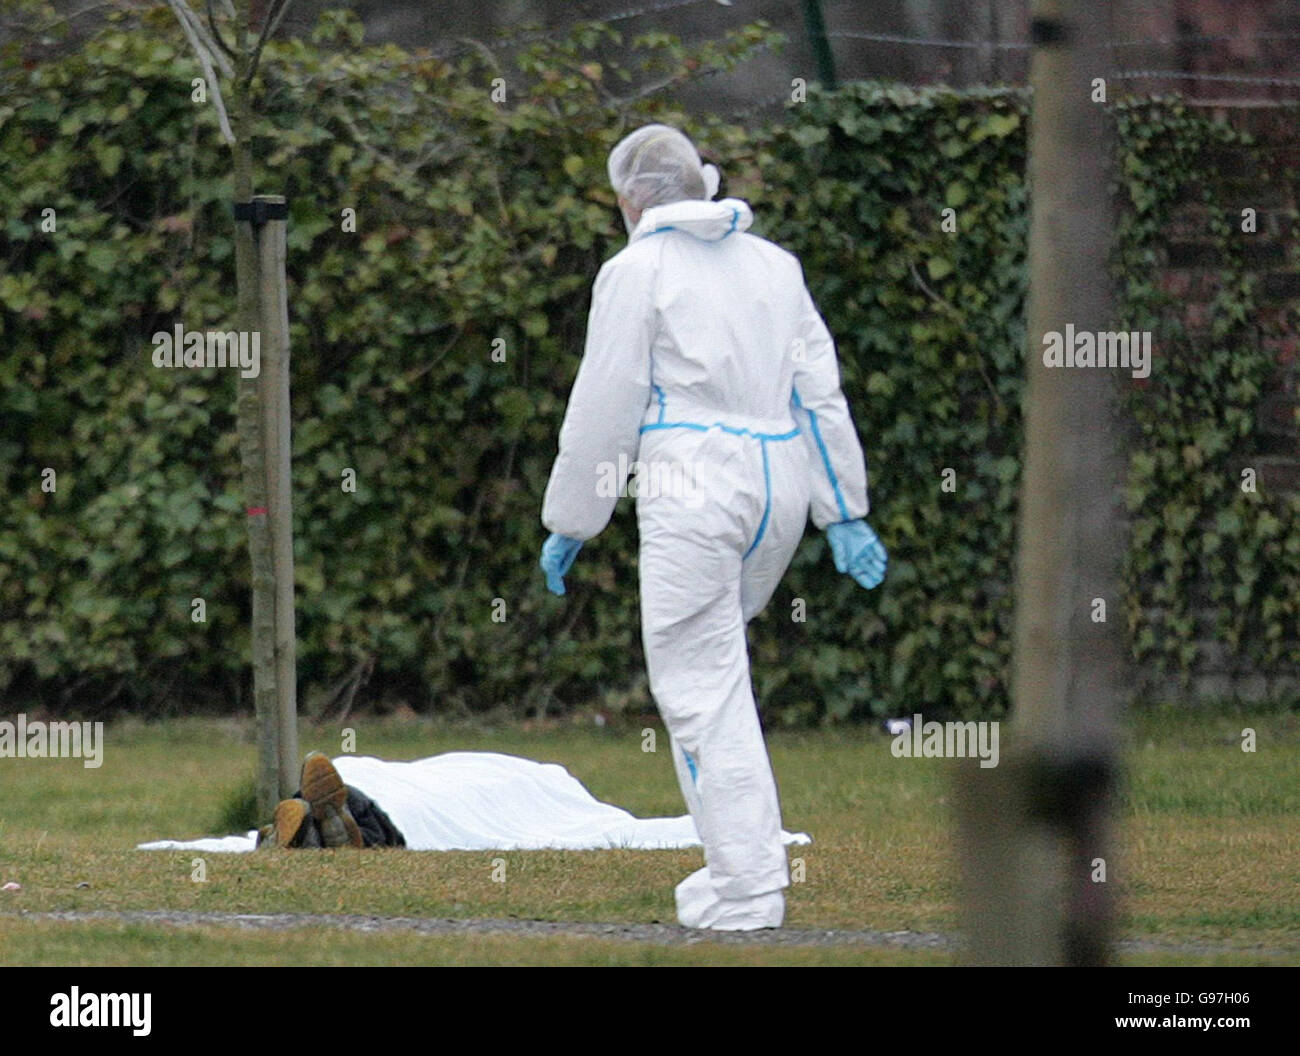 NOTE GRAPHIC CONTENT. A police forensic officer walks past a covered body after a shooting near the Brass Handles pub in Salford, Manchester, Sunday March 12, 2006. Two people were killed and two others were injured after the shooting, police said today. Officers were called to the pub at around 2.30pm today after reports of gun shots. The two injured people were taken to hospital but the extent of their injuries is unknown. See PA Story POLICE Shooting. PRESS ASSOCIATION Photo. Photo credit should read: Martin Rickett/PA. Stock Photo